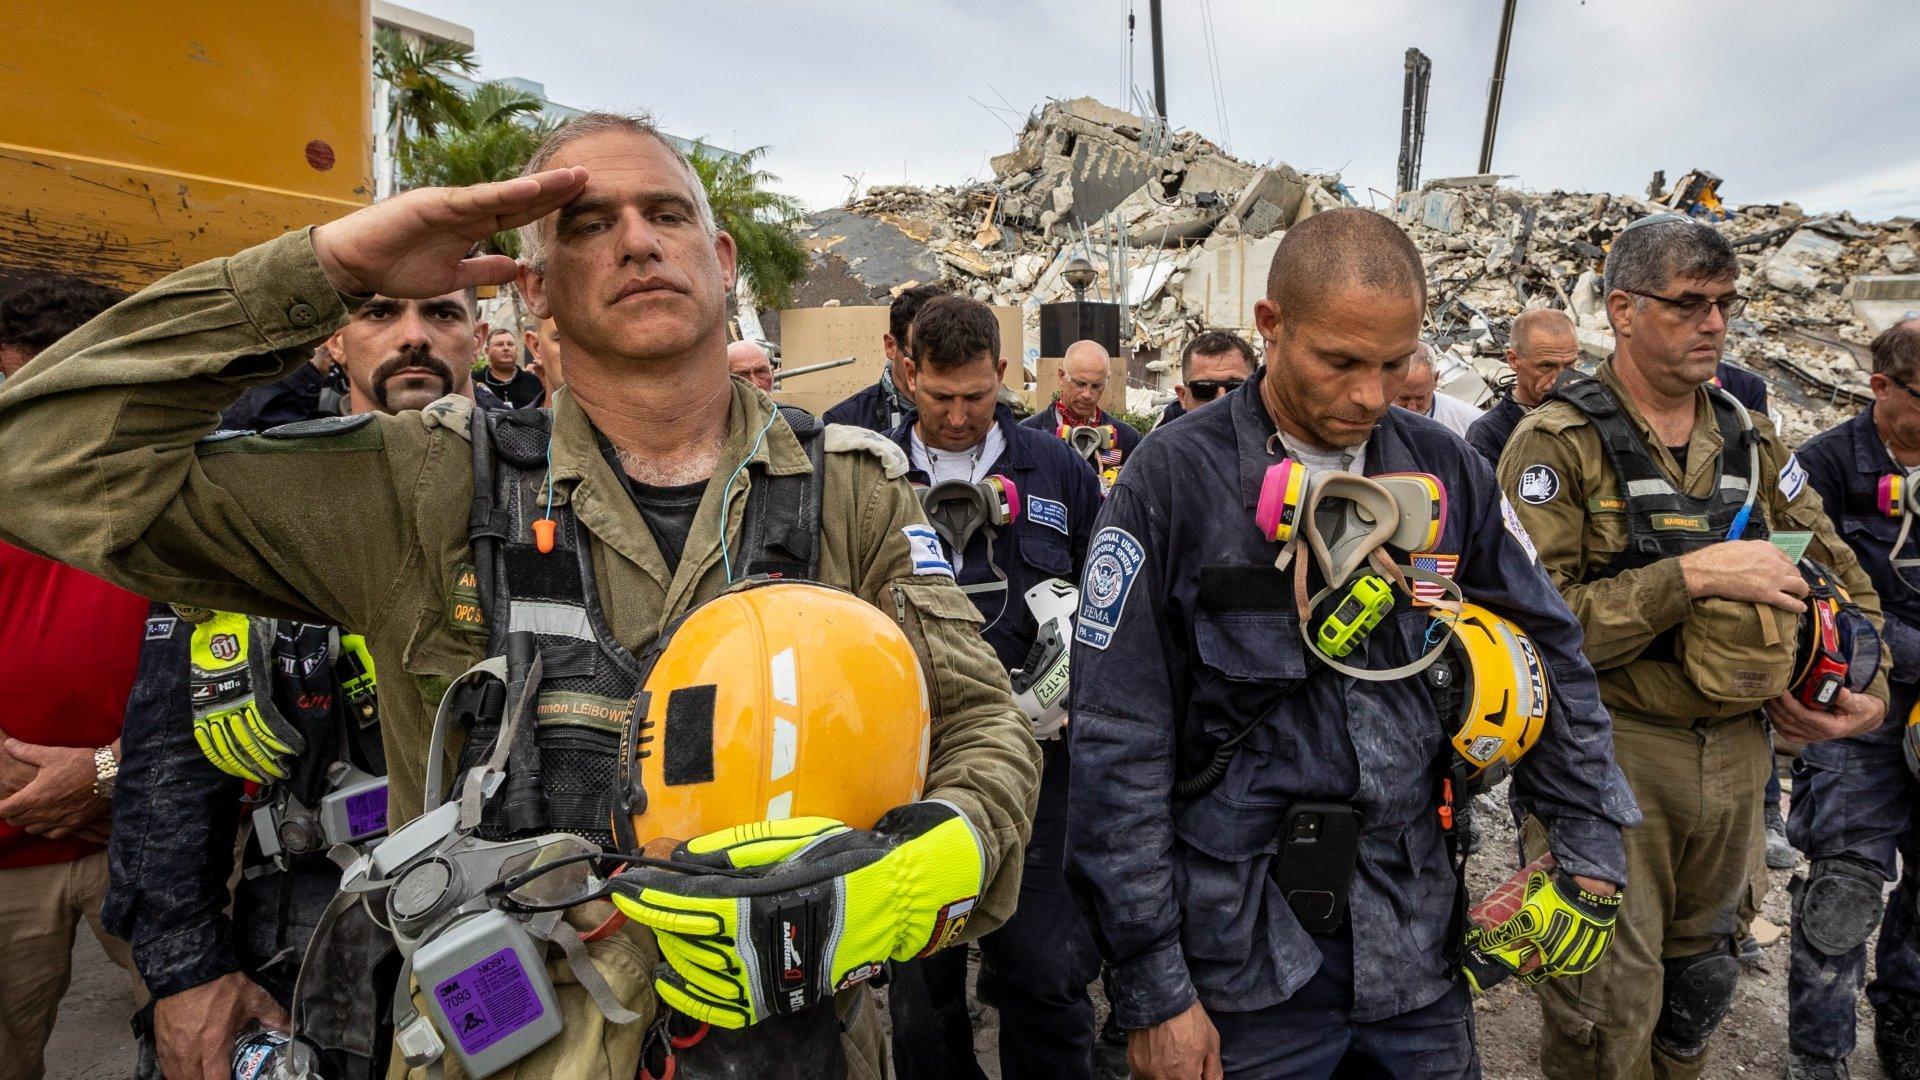 A member of the Israeli search and rescue team, left, salutes in front of the rubble that once was Champlain Towers South during a prayer ceremony, Wednesday, July 7, 2021, in Surfside, Fla. (Jose A Iglesias / Miami Herald via AP)